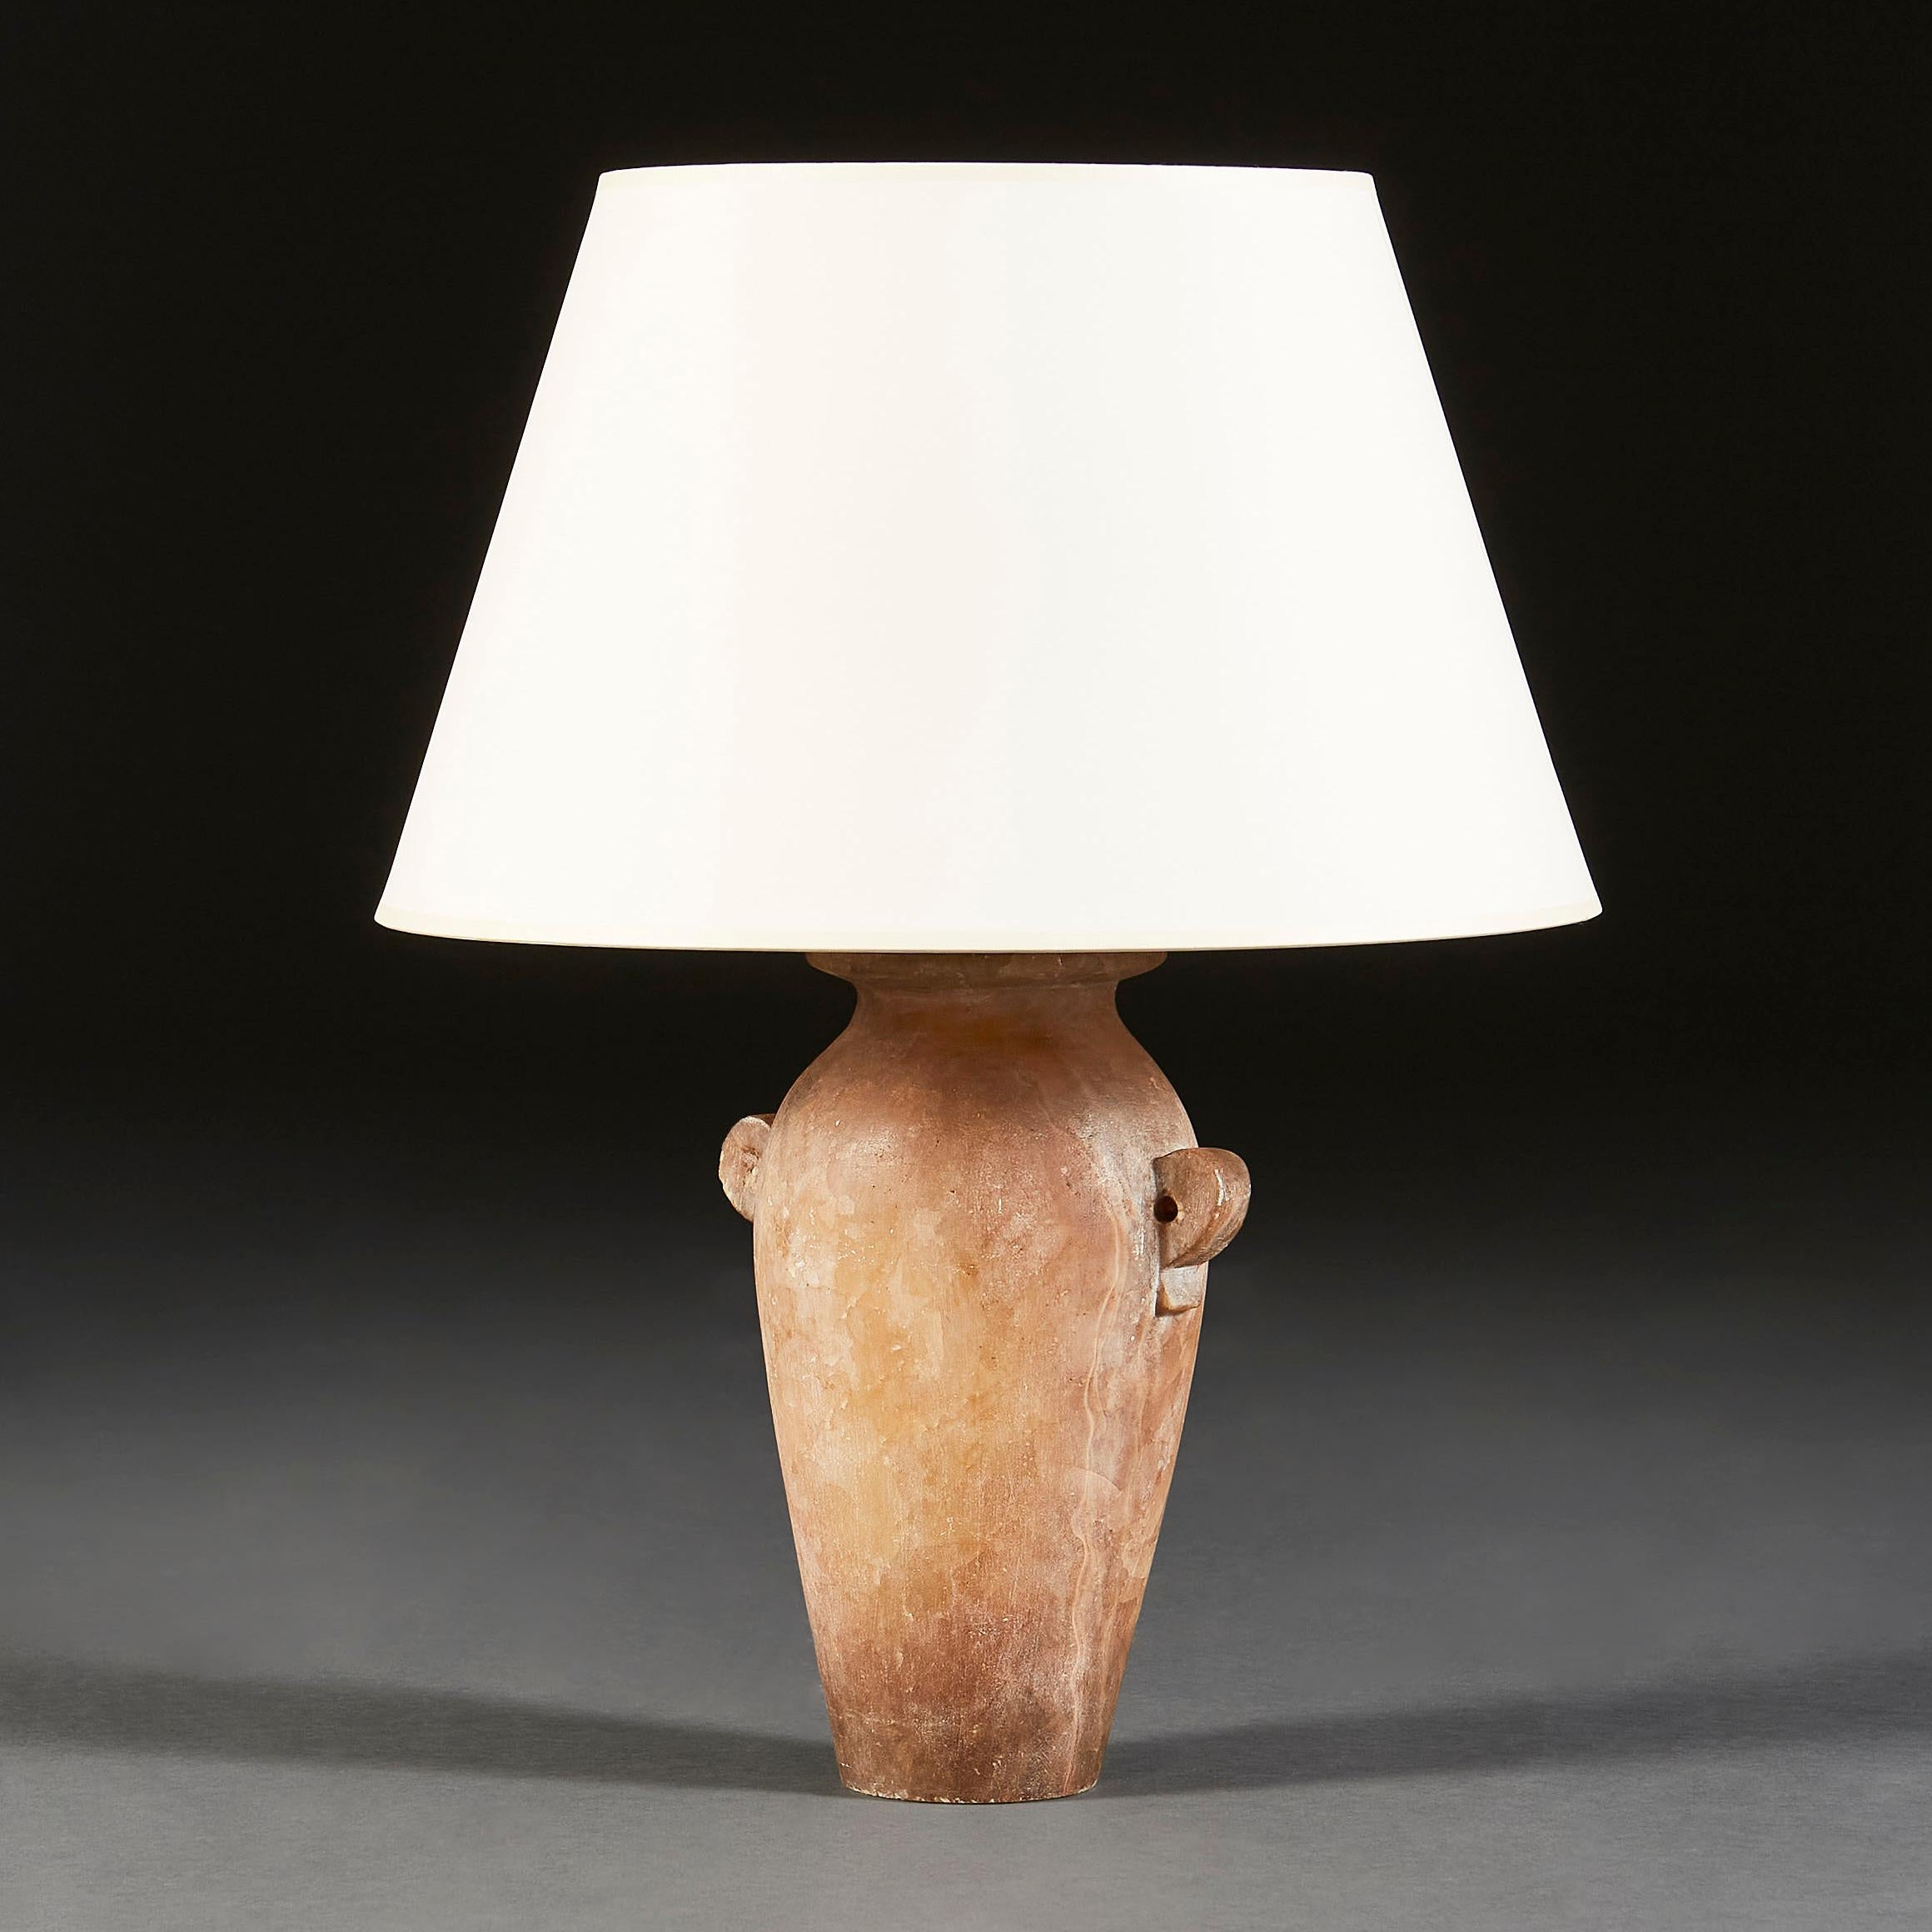 20th Century Italian Alabaster Vase with Loop Handles as a Table Lamp